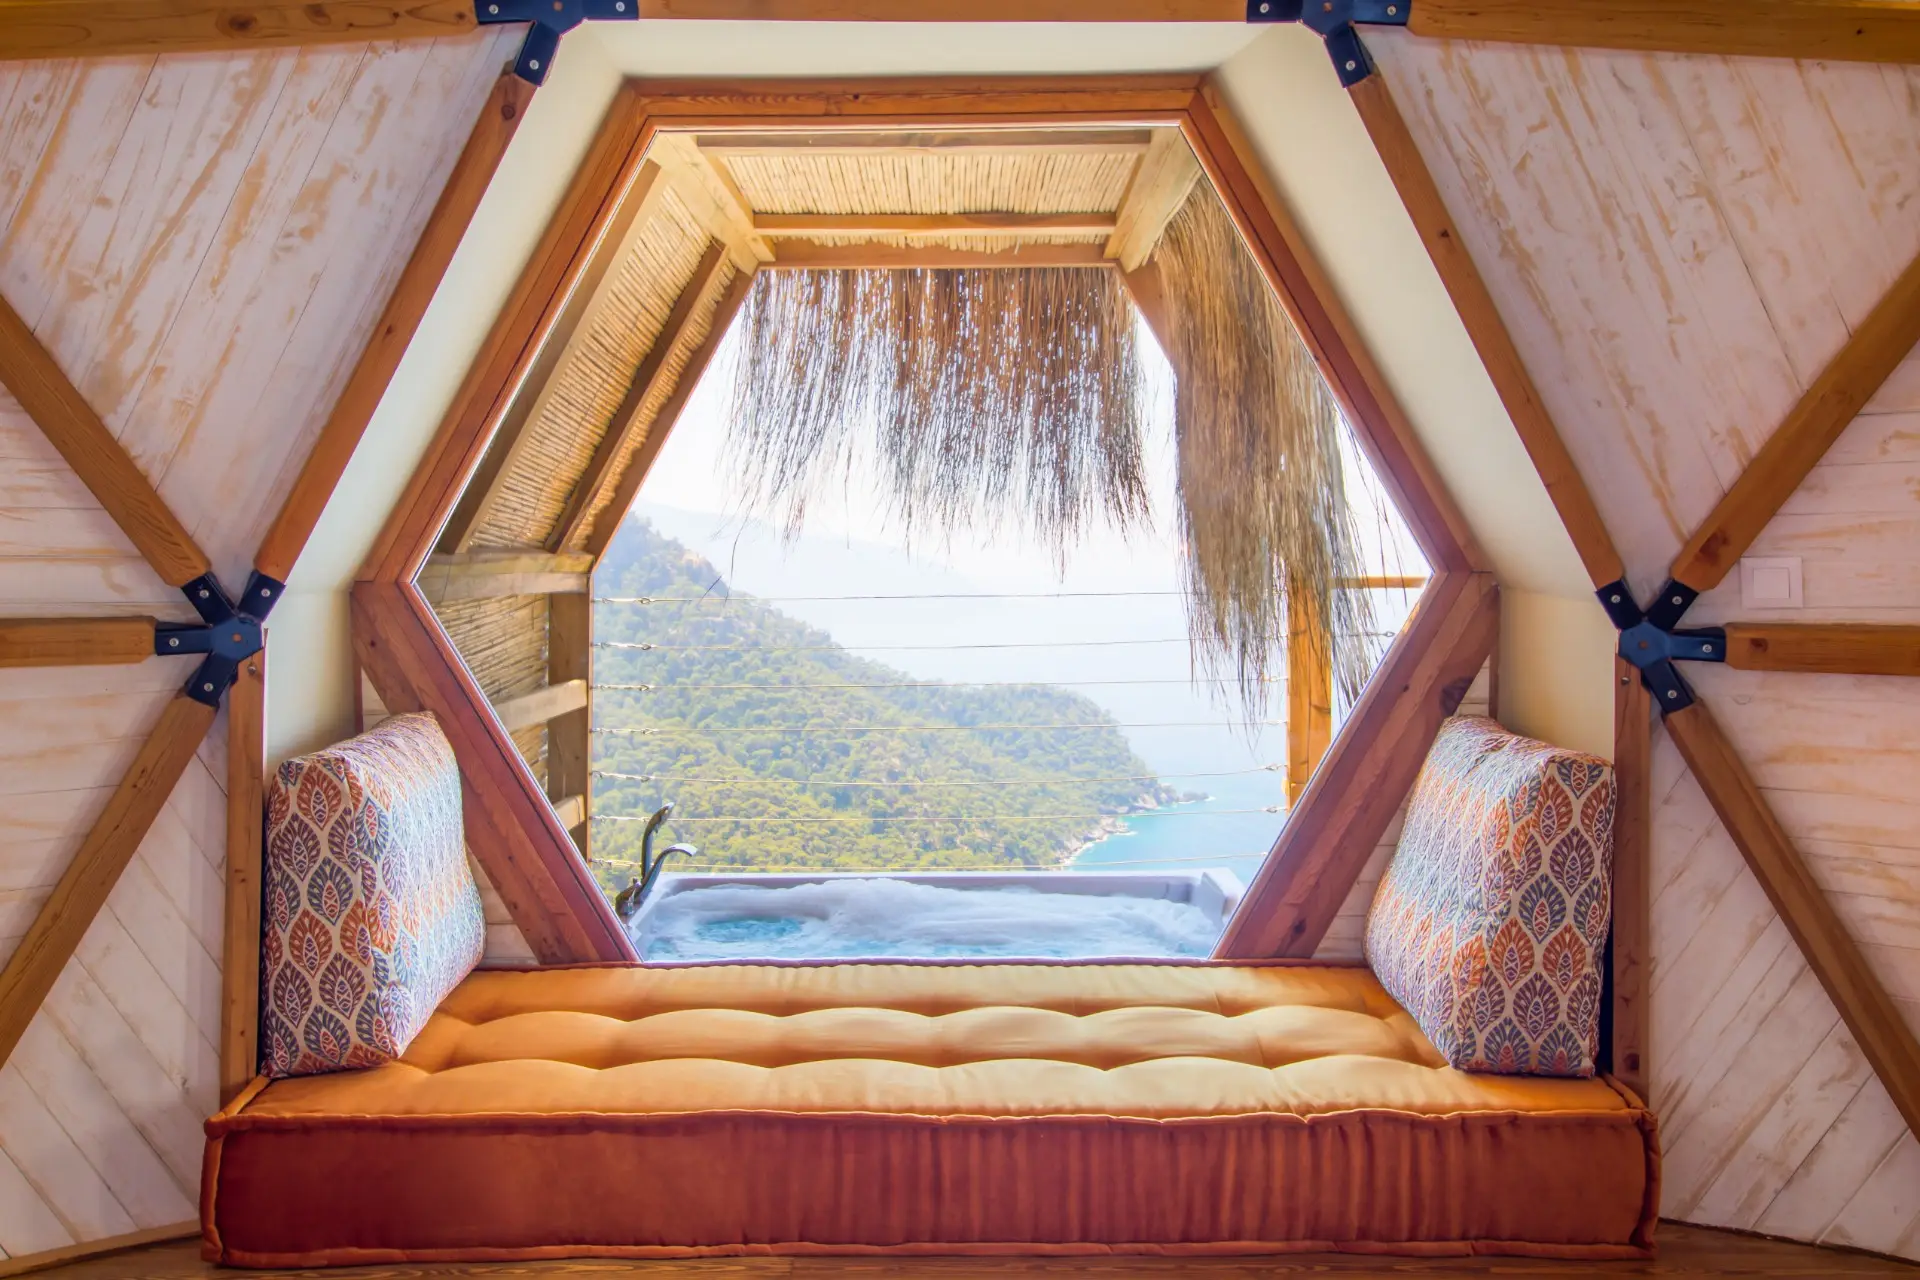 No:3 Dome Tranquil Suite